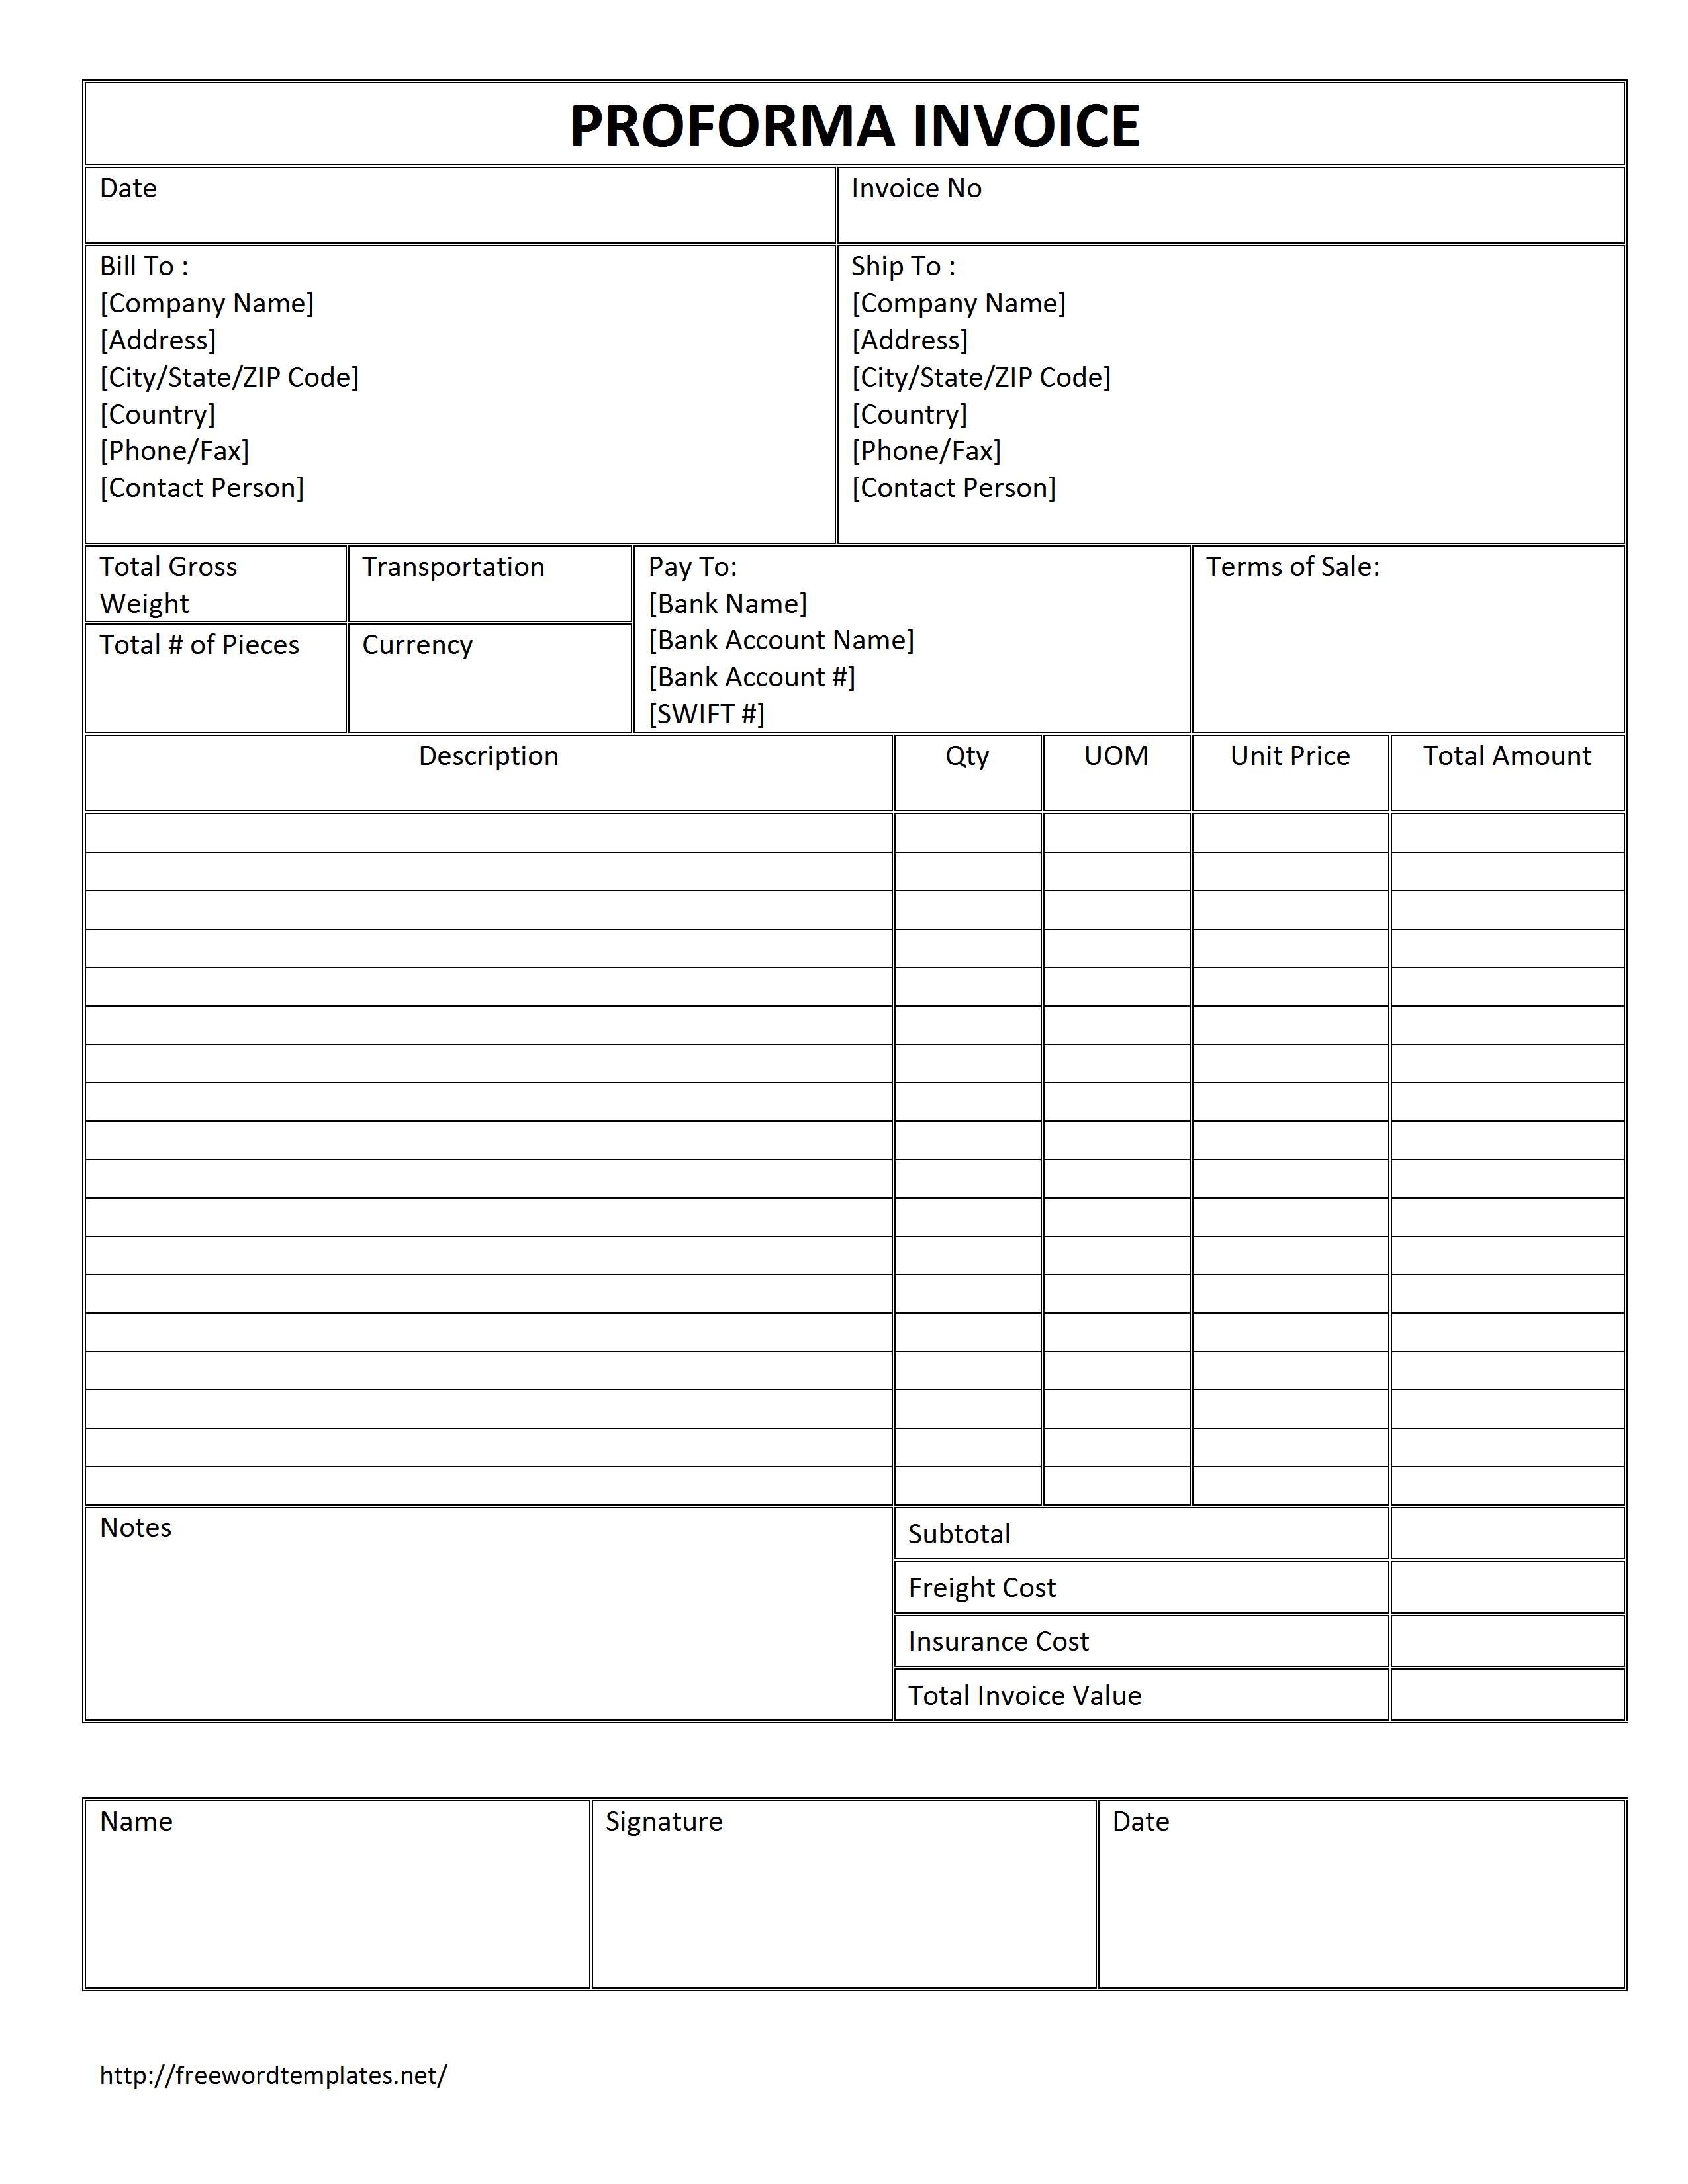 photography invoice word templates free word templates ms purpose of proforma invoice